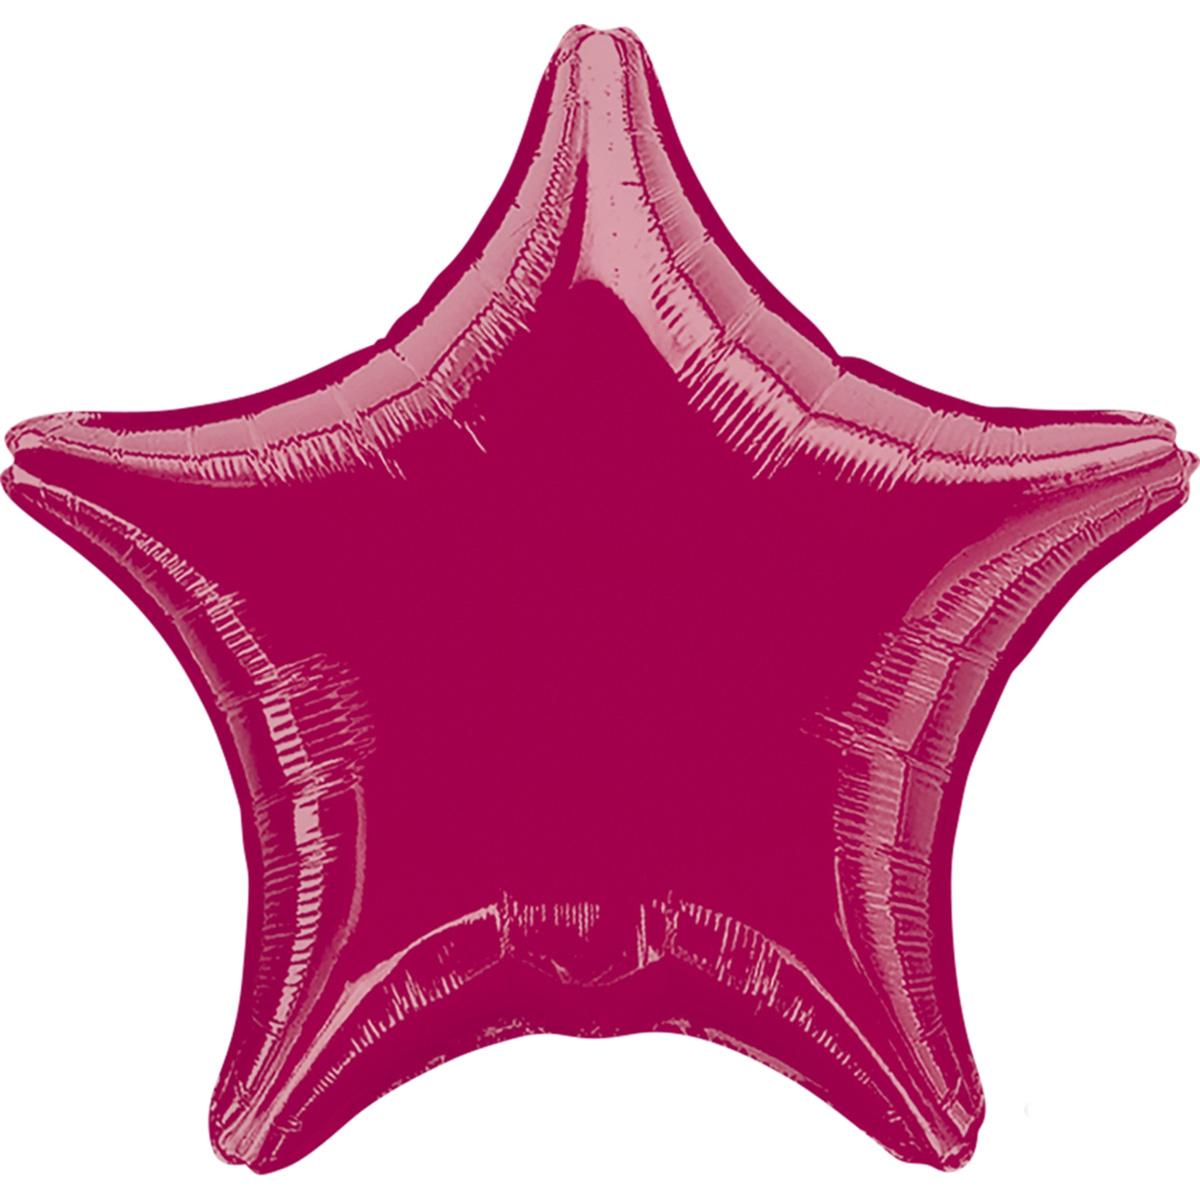 Metallic Burgundy Star Foil Balloon 19in Balloons & Streamers - Party Centre